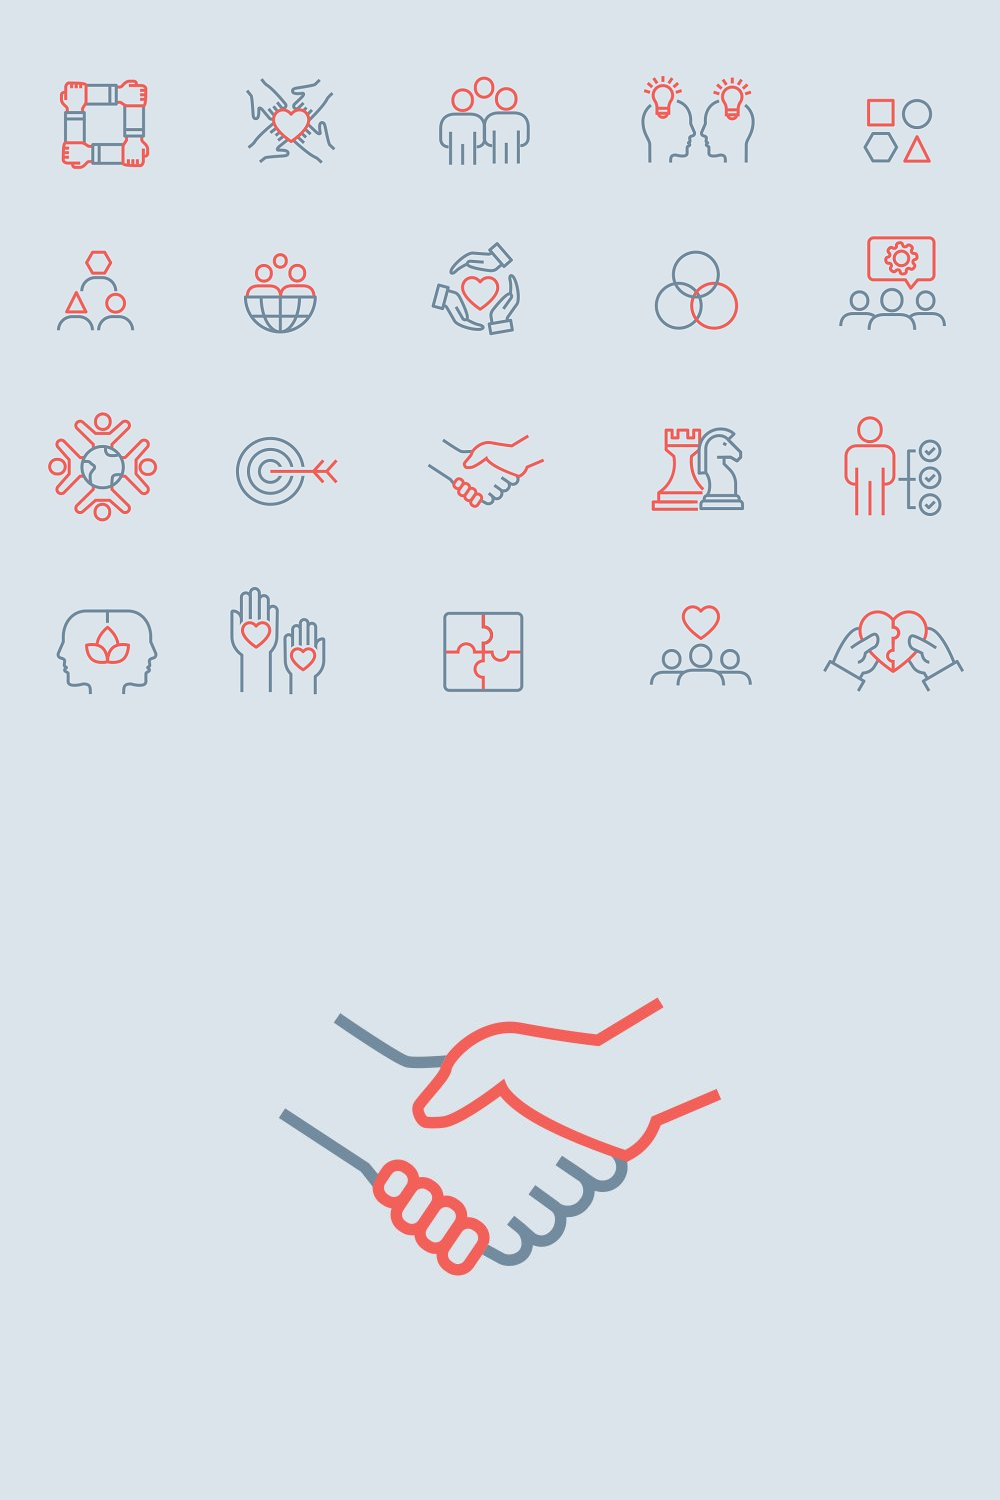 Illustrations 20 diversity at work icons of pinterest.